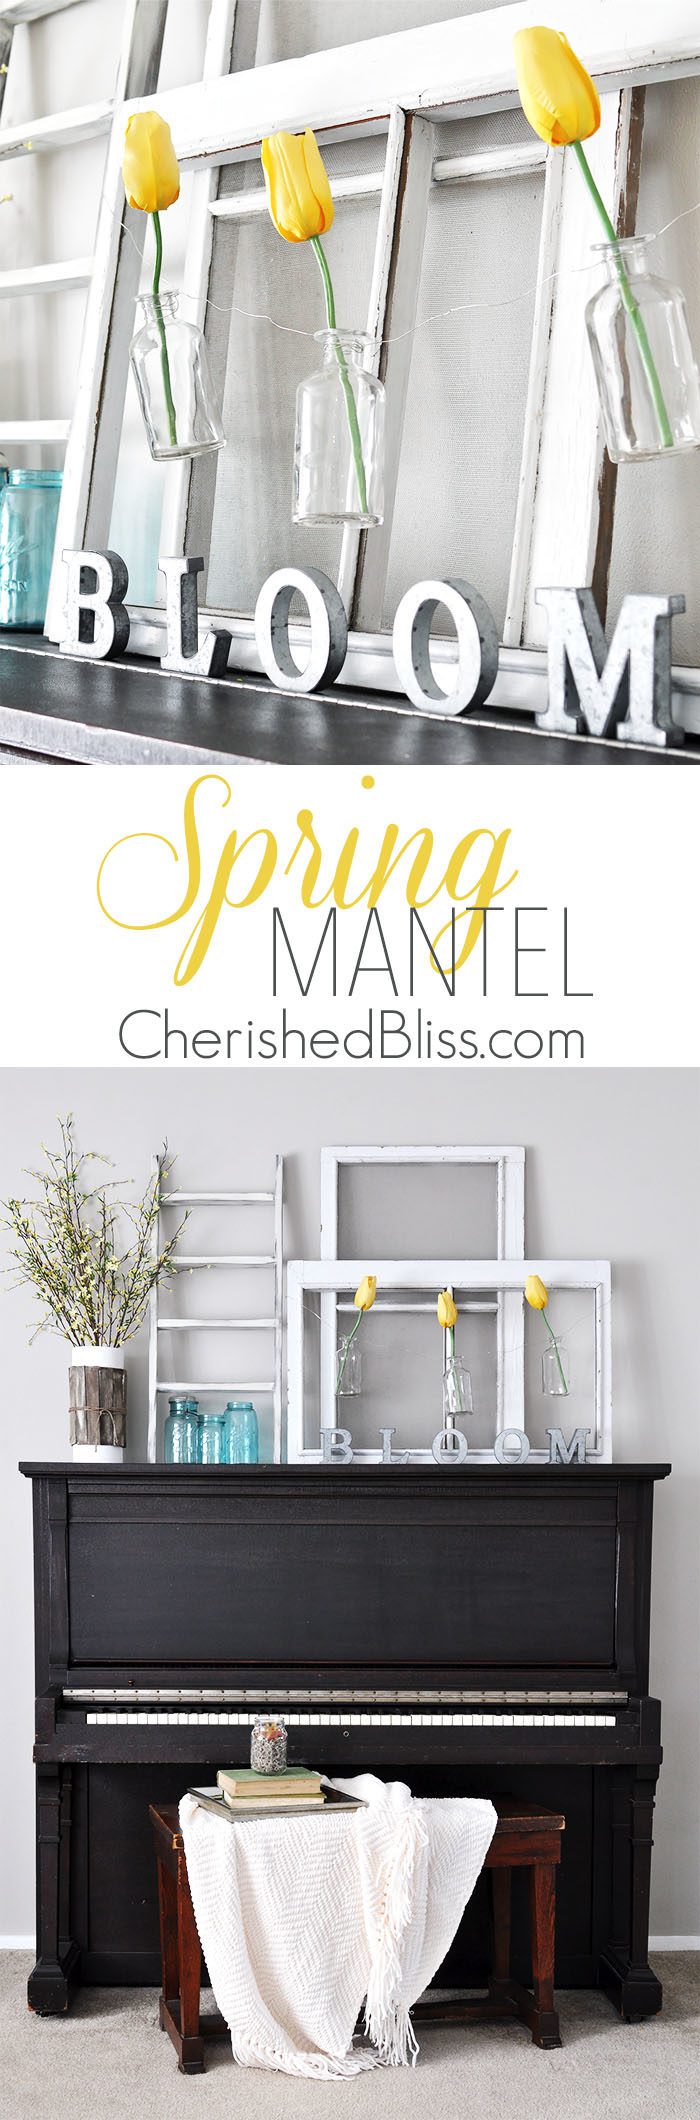 Love this Simple Cottage Farmhouse Spring Mantel from CherishedBliss.com